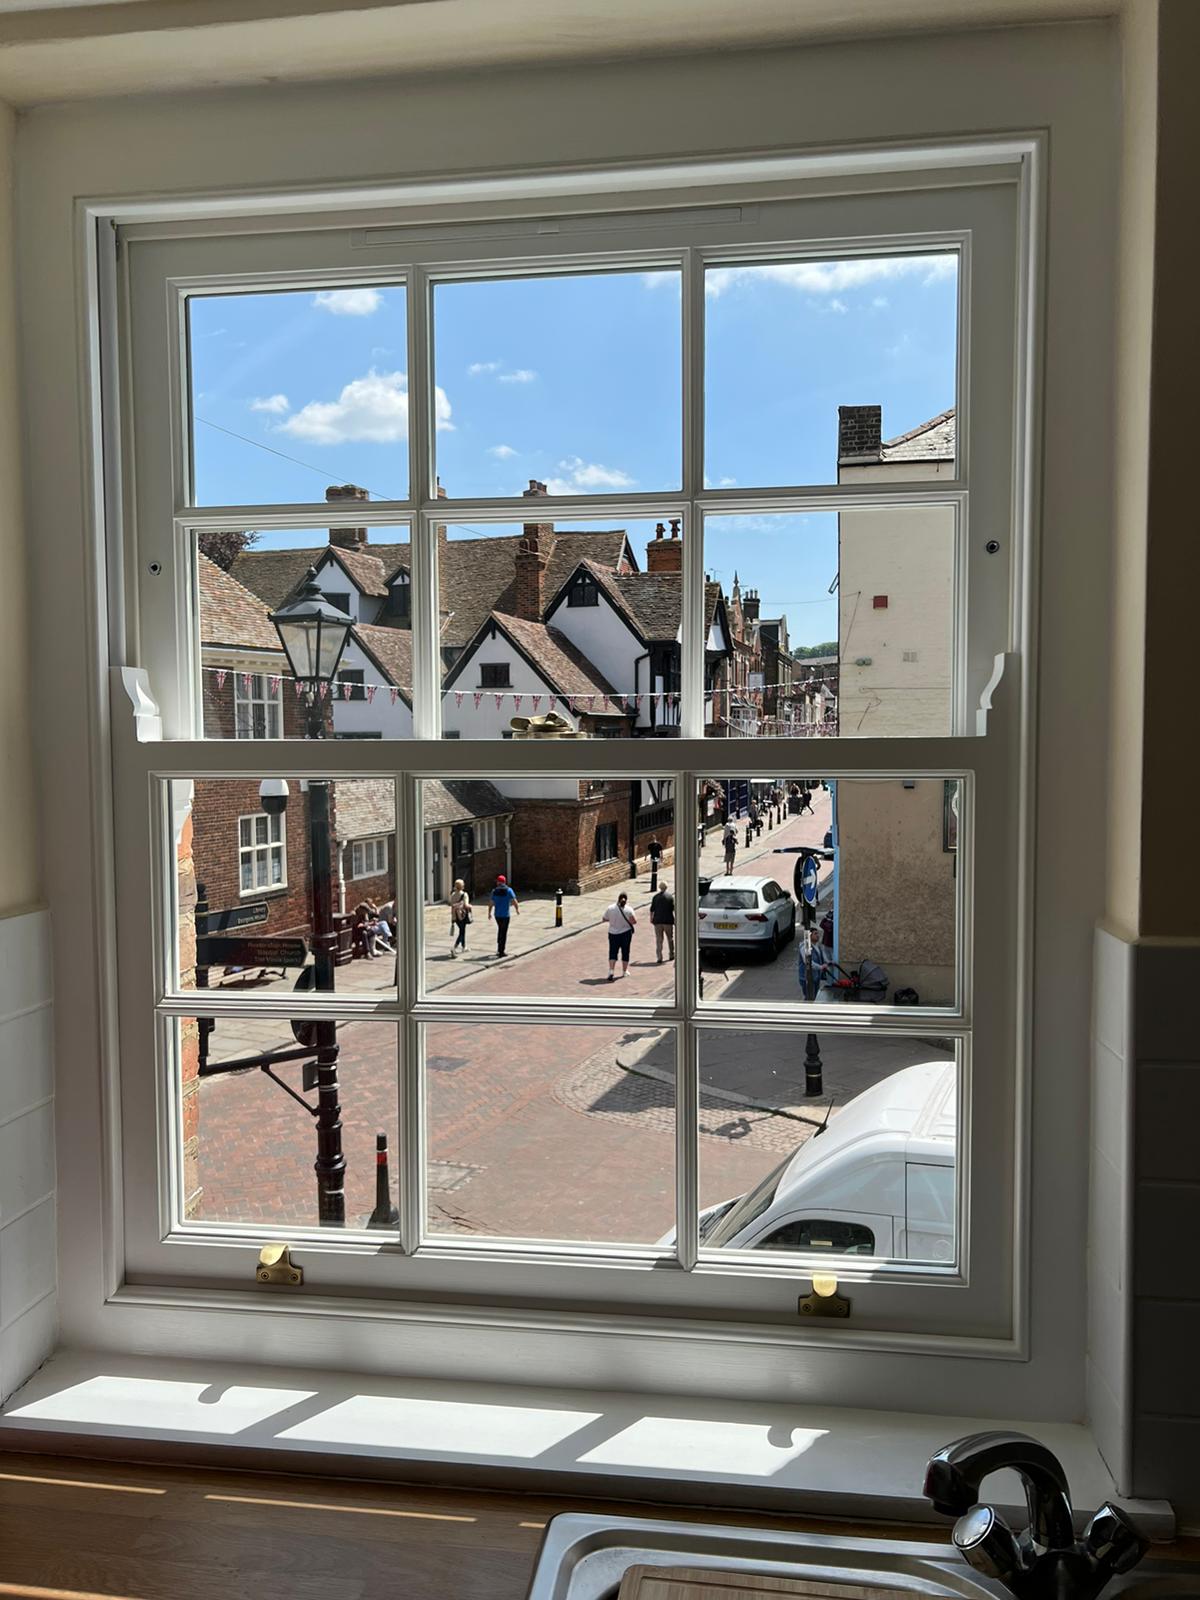 Sash window showing people out in the street